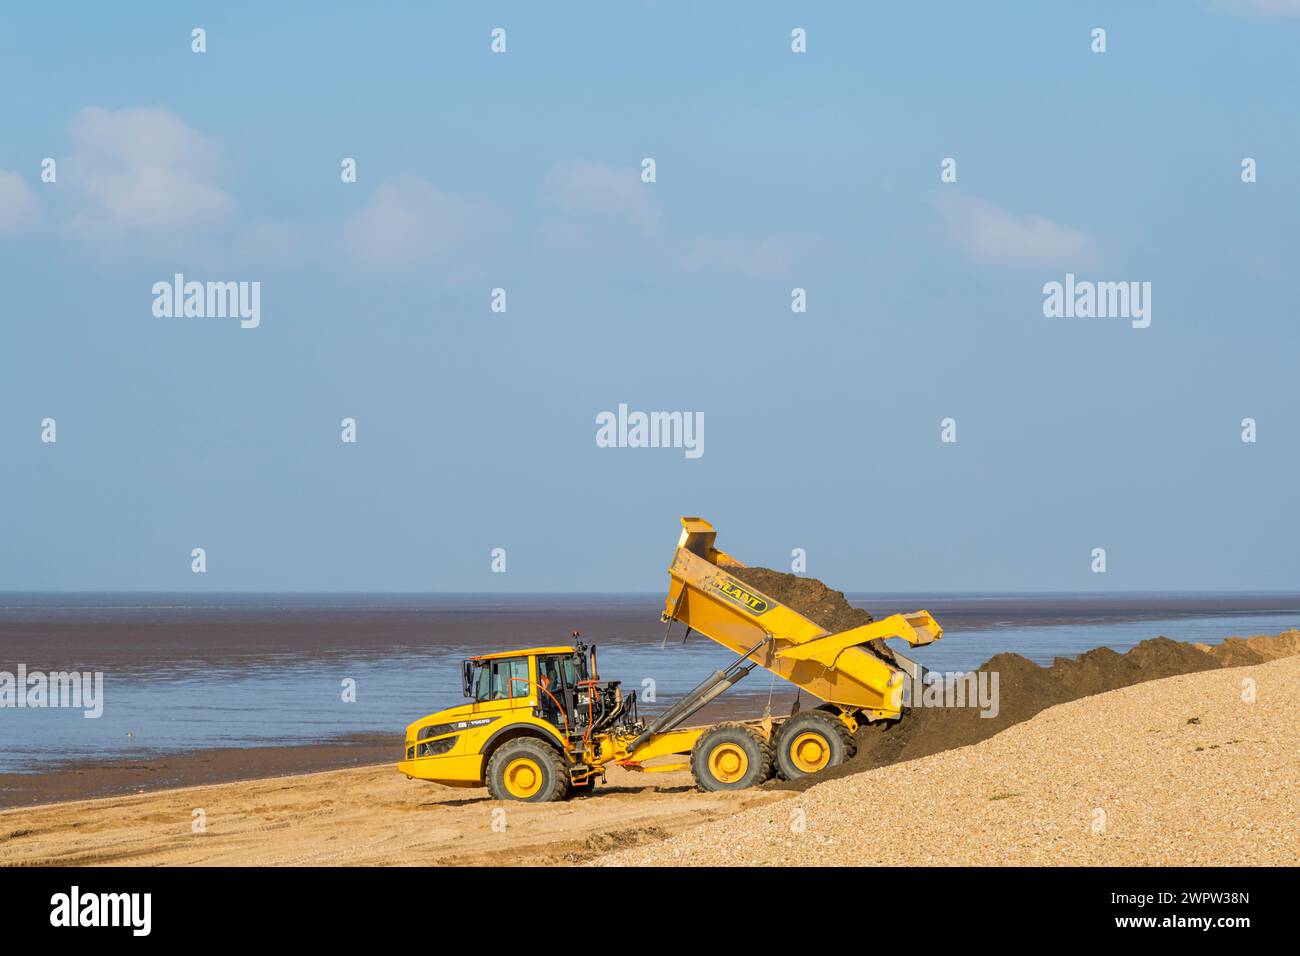 Volvo A30G dump truck of Tru Plant carrying out shoreline restoration & maintenance work on the shore of The Wash at Snettisham beach, Norfolk. Stock Photo